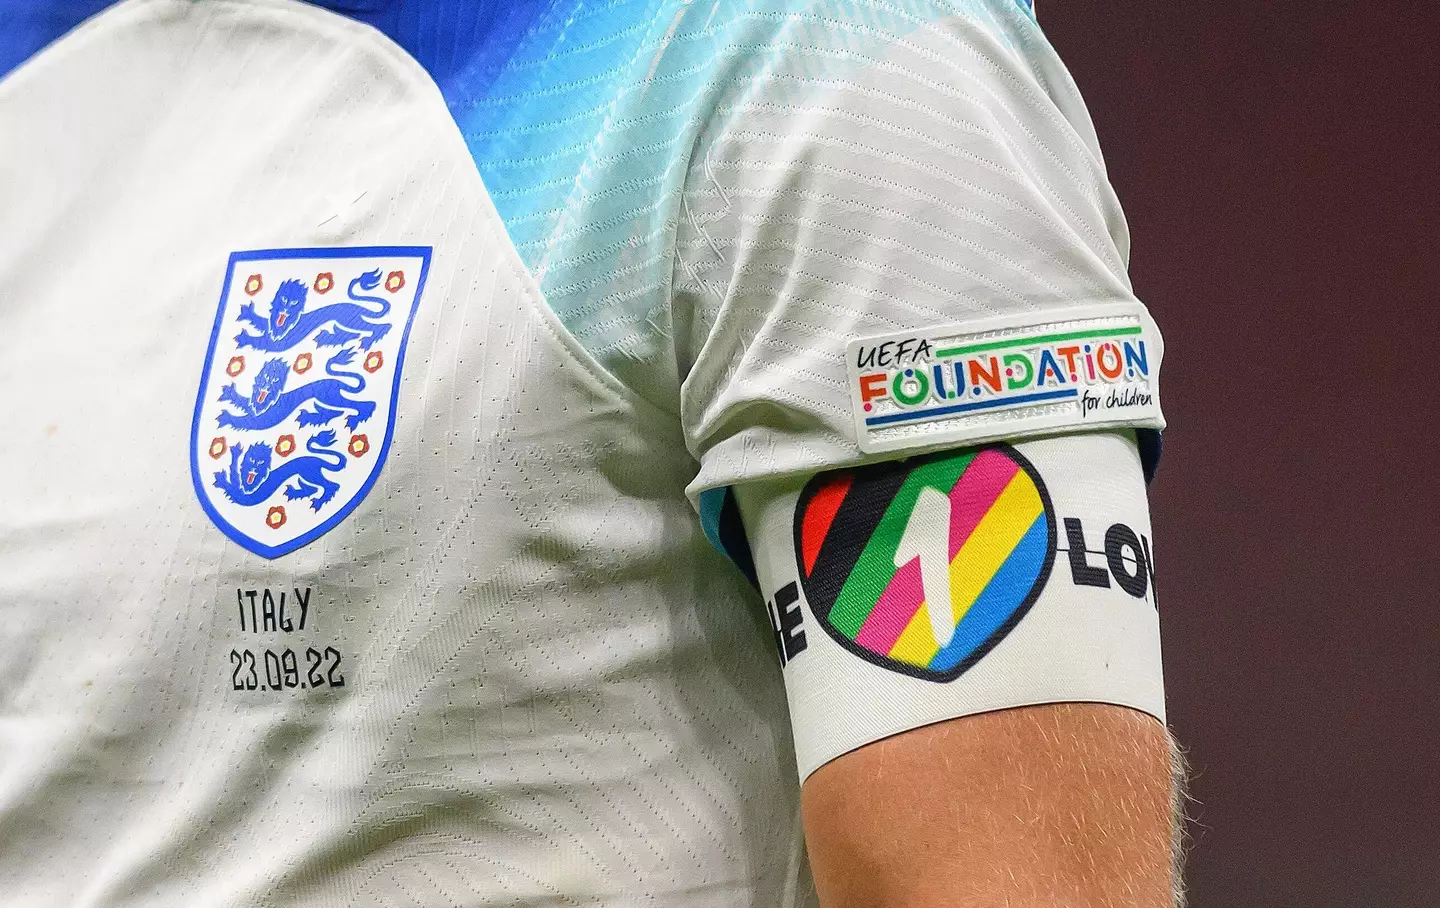 England had planned on wearing 'One Love' armbands at the World Cup.